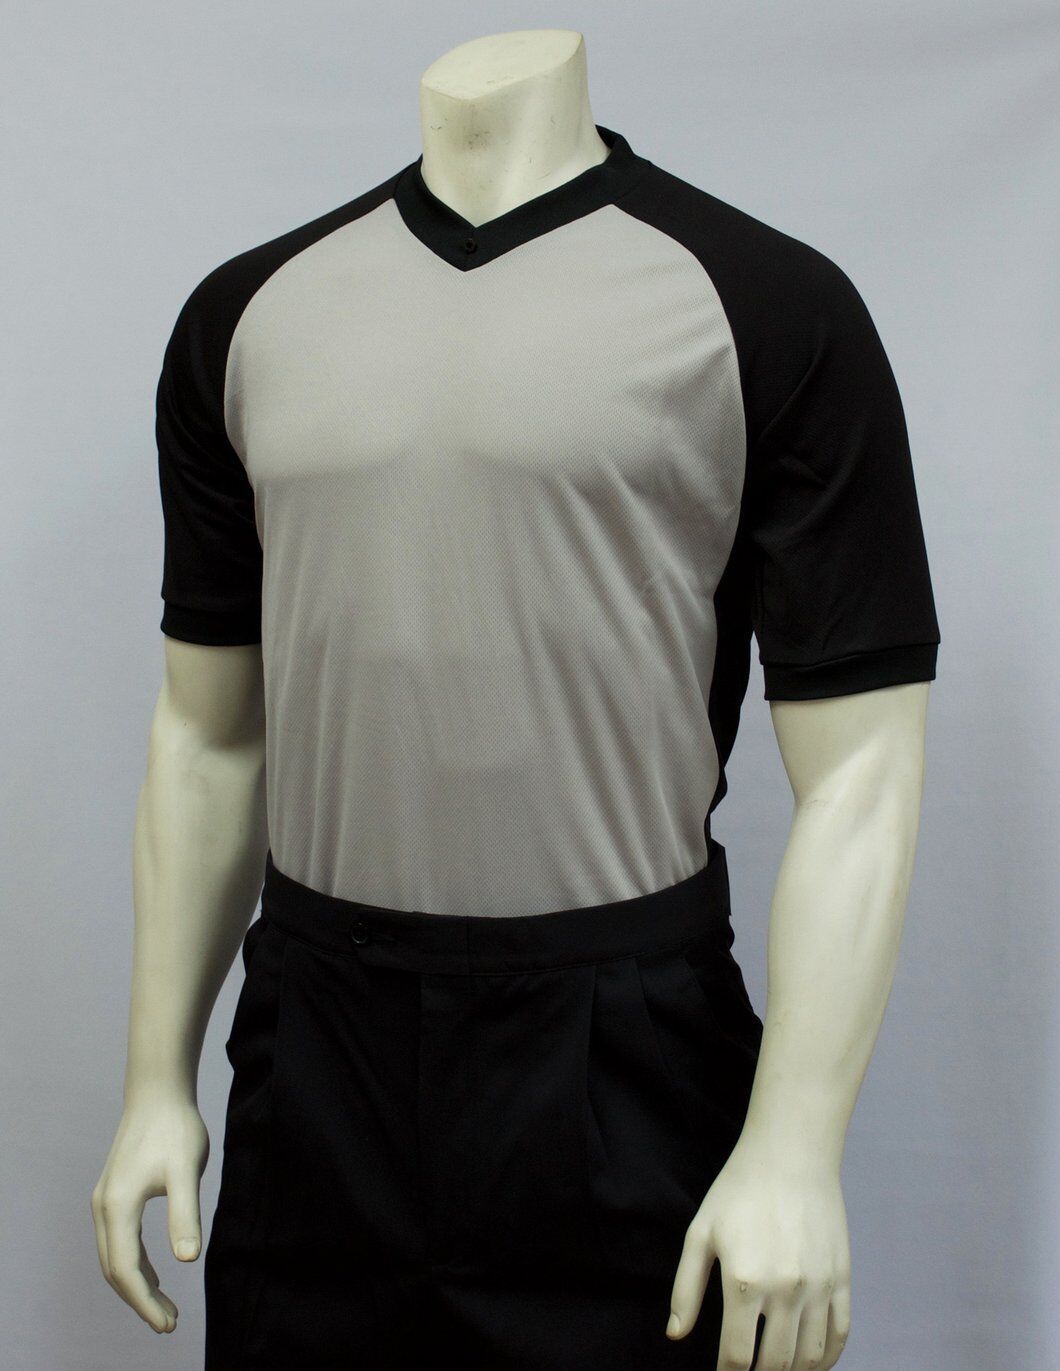 Primary image for SMITTY | BKS-207 | Solid Grey | 3" Side Panel | MESH Basketball Officials Shirt